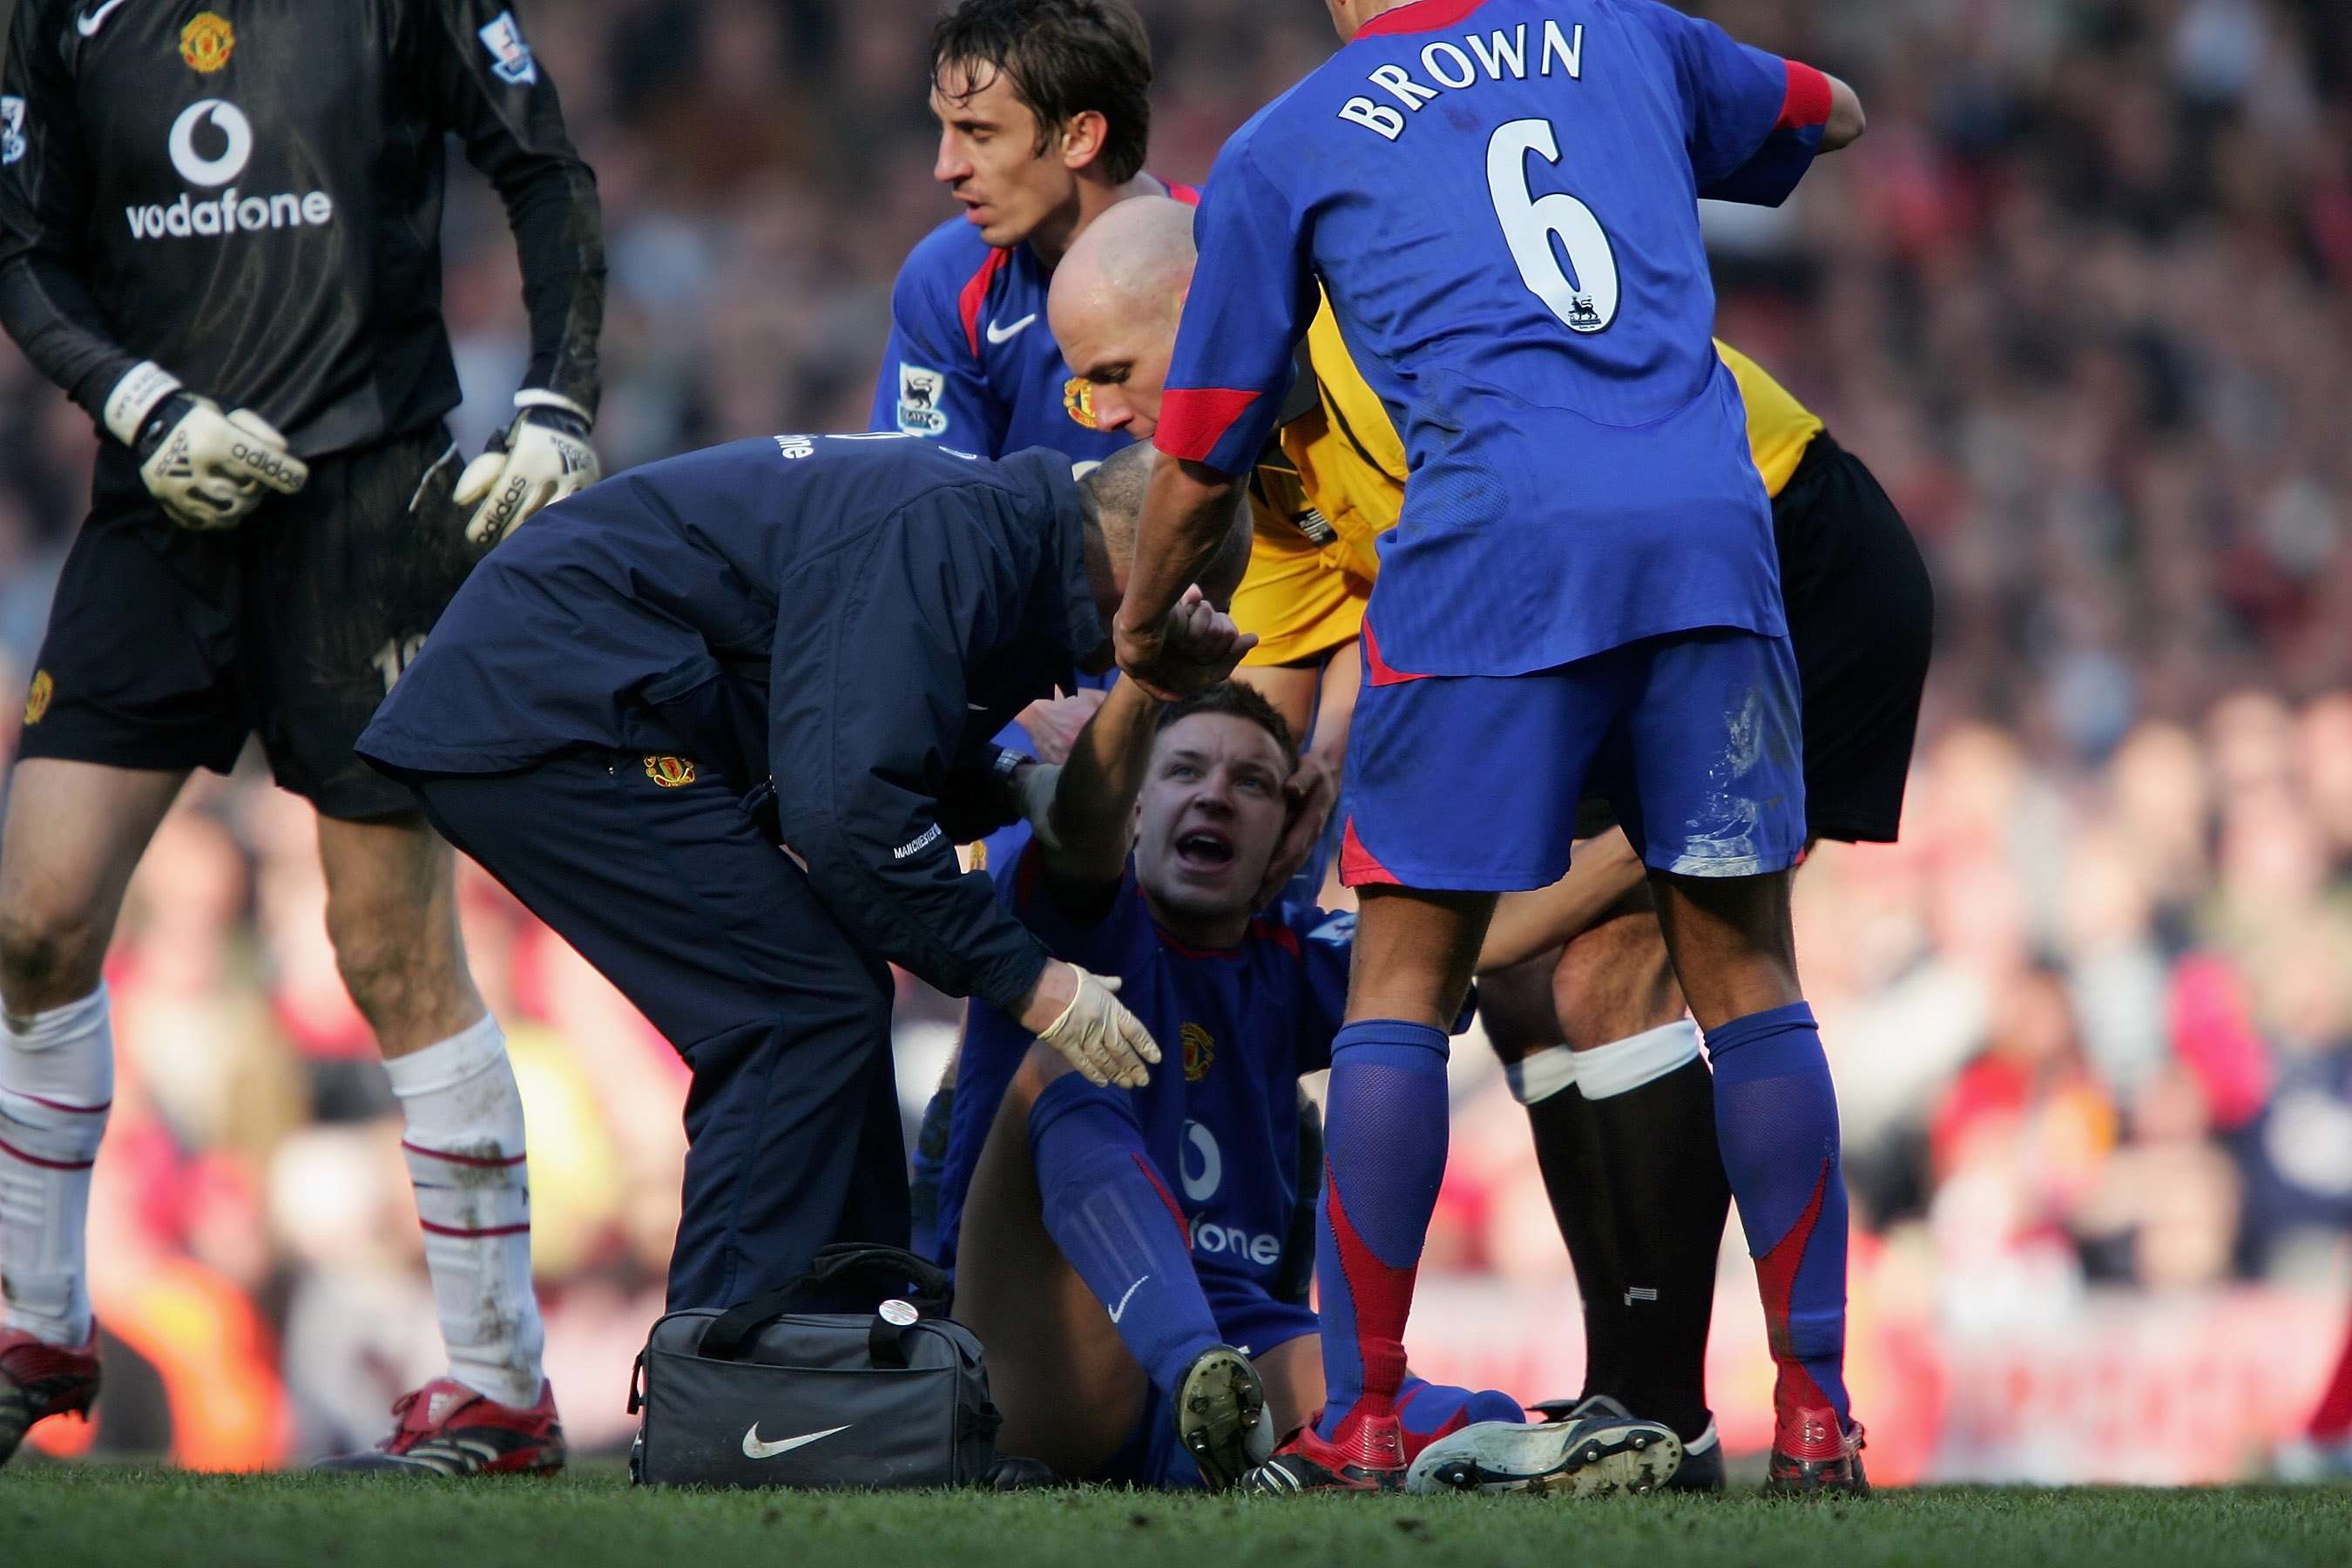 Alan Smith breaking leg during the FA Cup fifth round match between Liverpool vs Manchester United - Anfield 2006